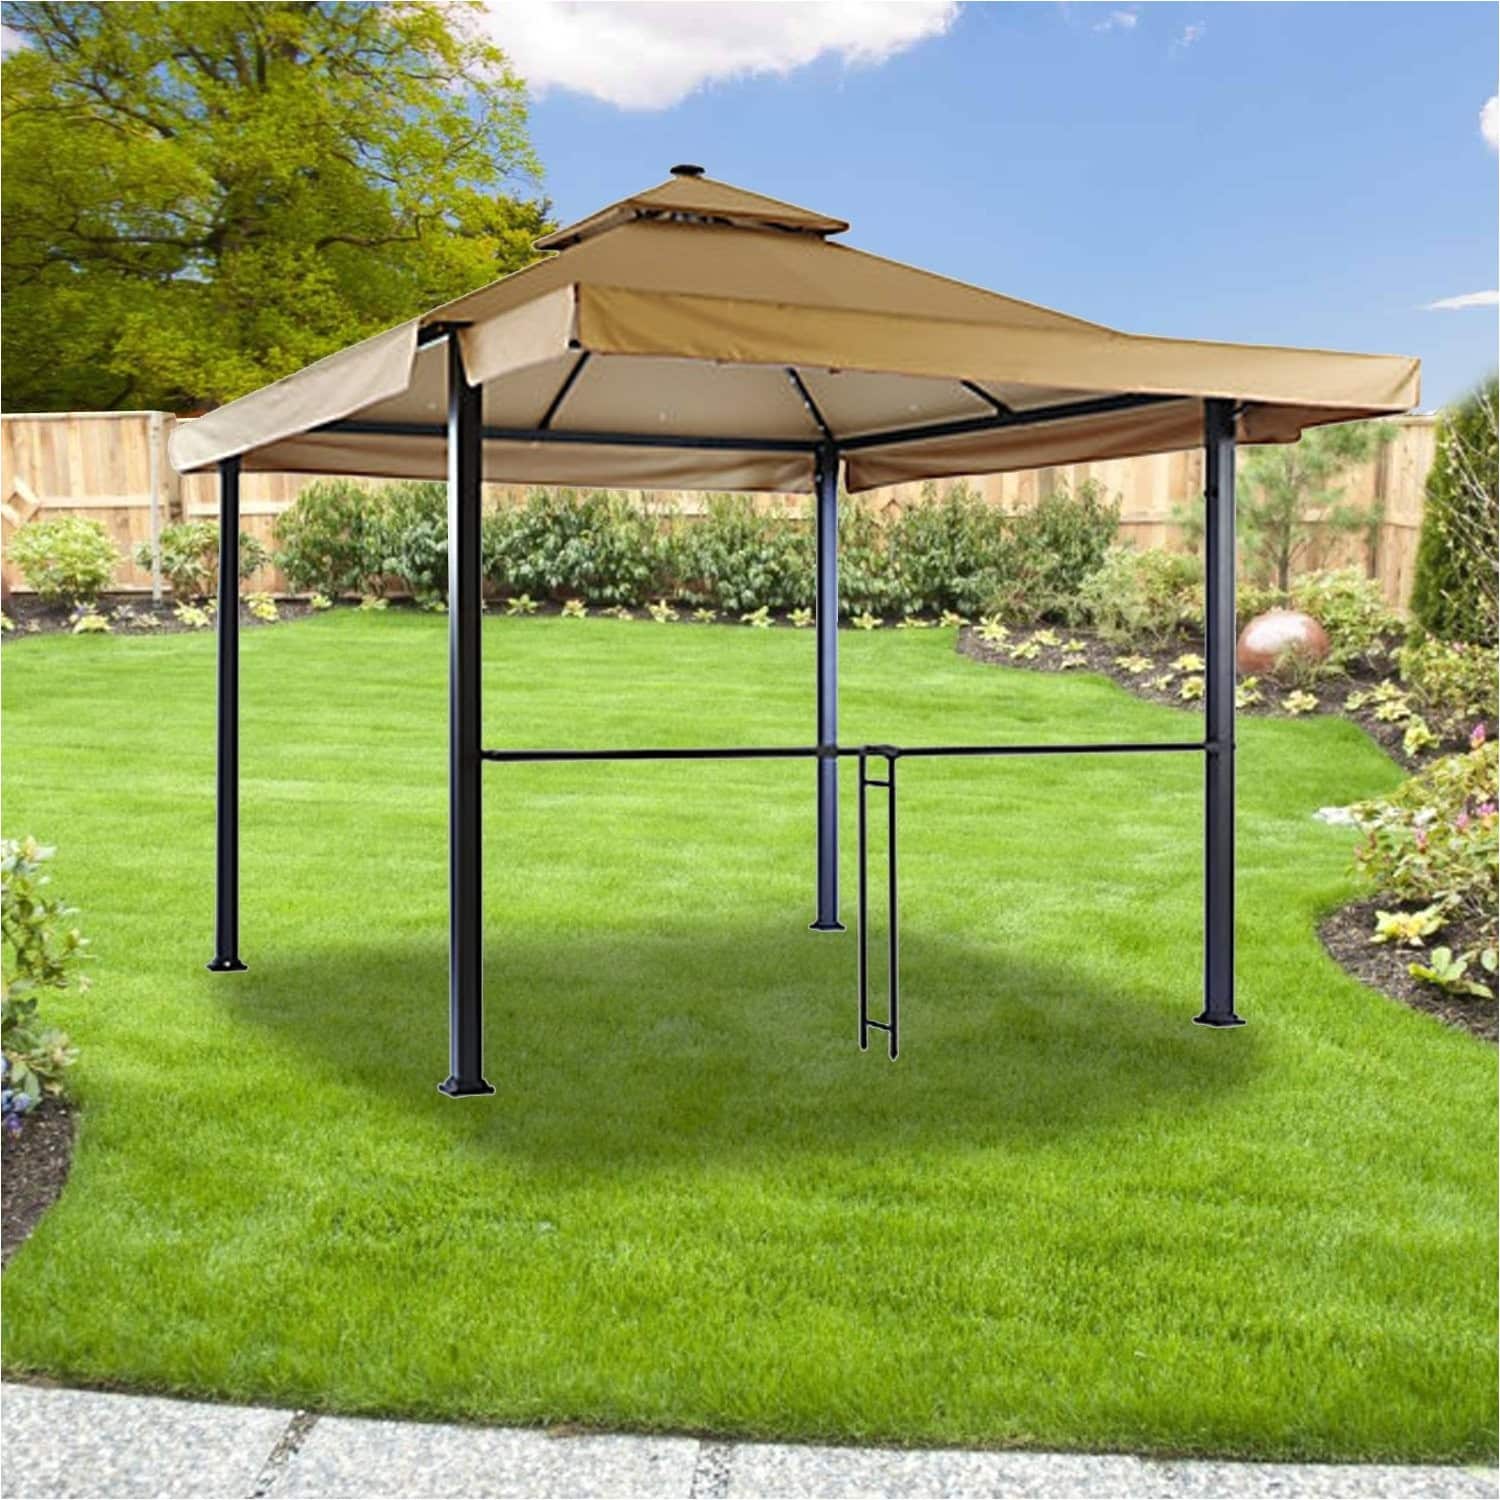 Backyard Creations Replacement Canopy for 10x10 Gazebo